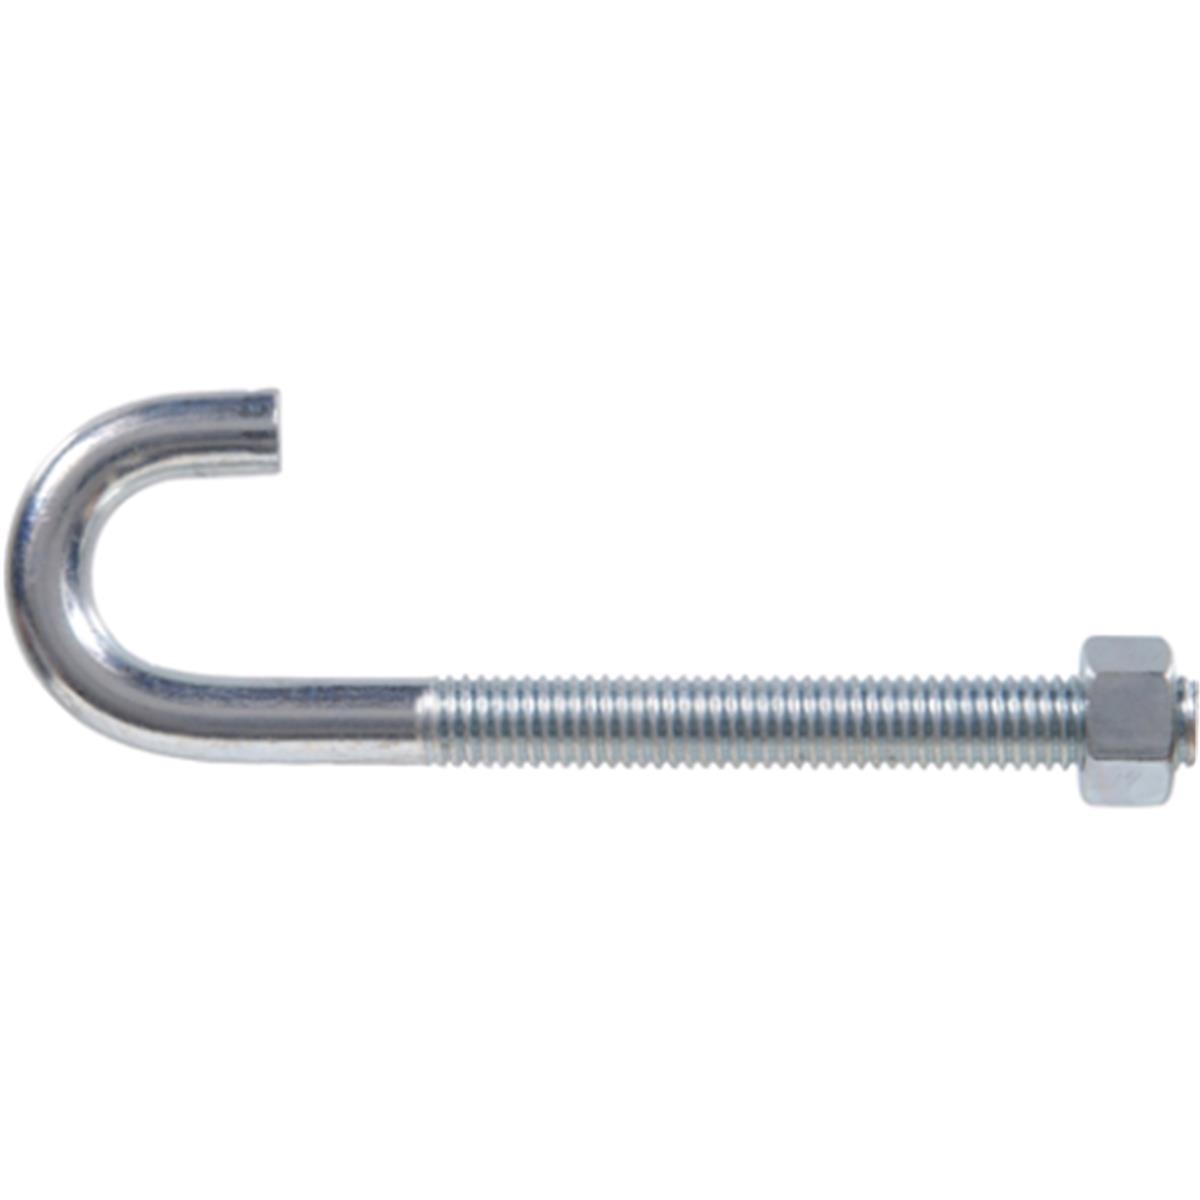 0.25 X 6 In. Zinc Plated J-bolt, Pack Of 10